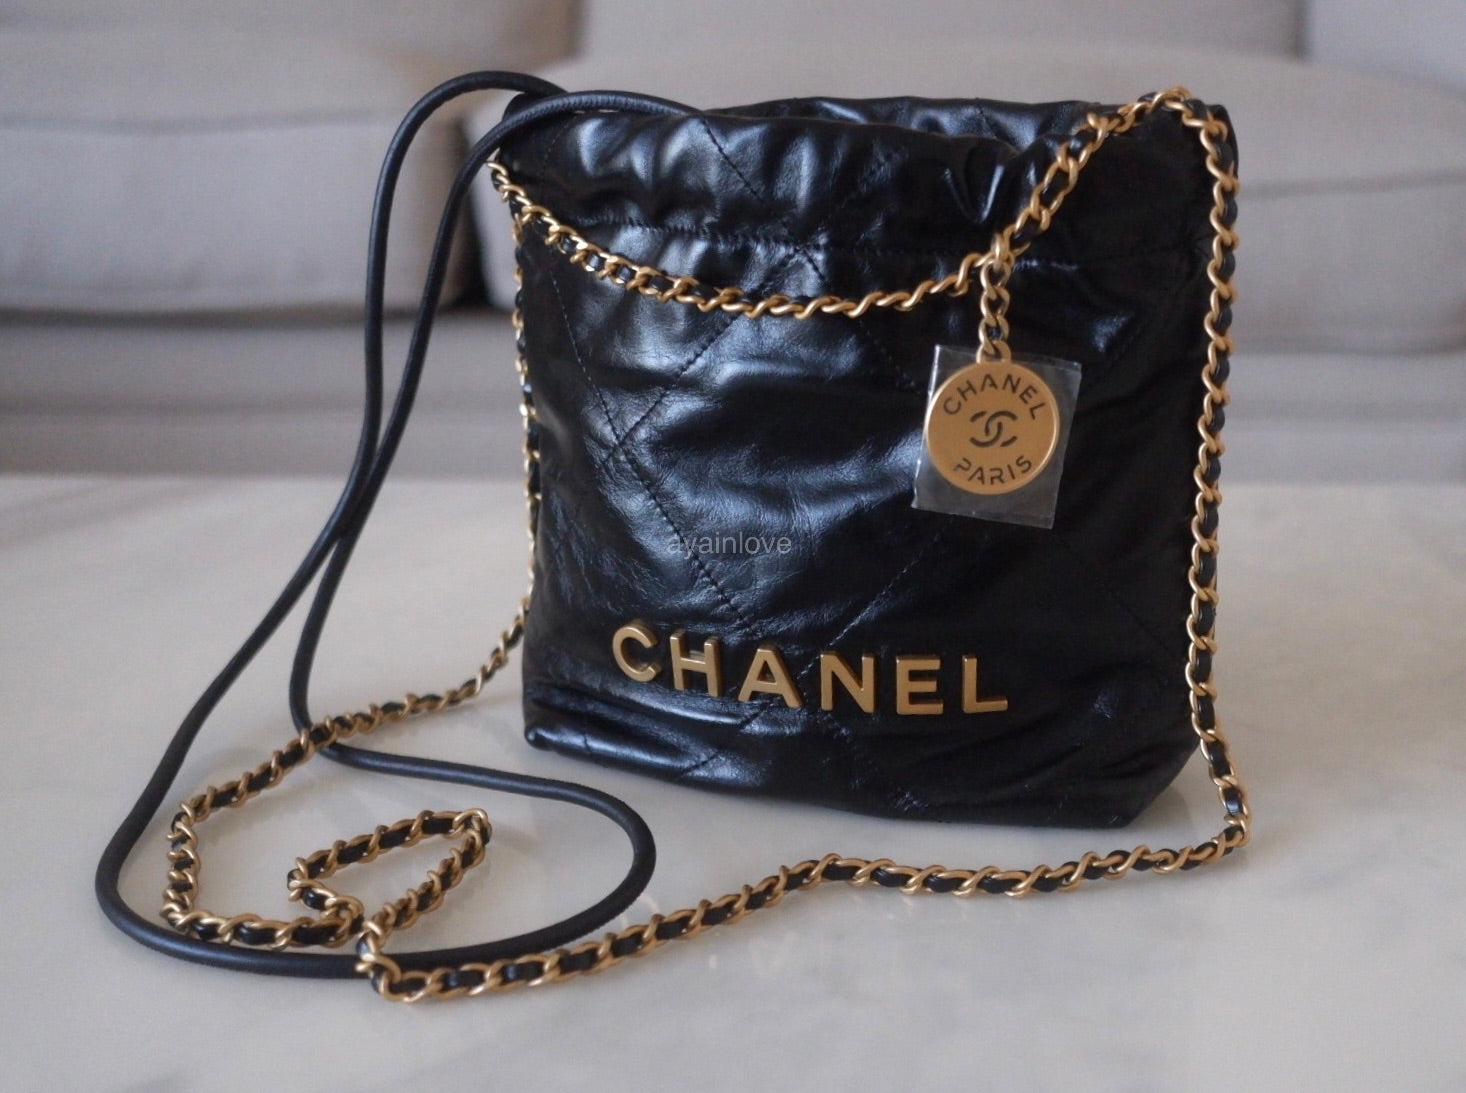 Chanel Classic WOC Wallet on Chain in Black Caviar with Silver Hardware -  SOLD